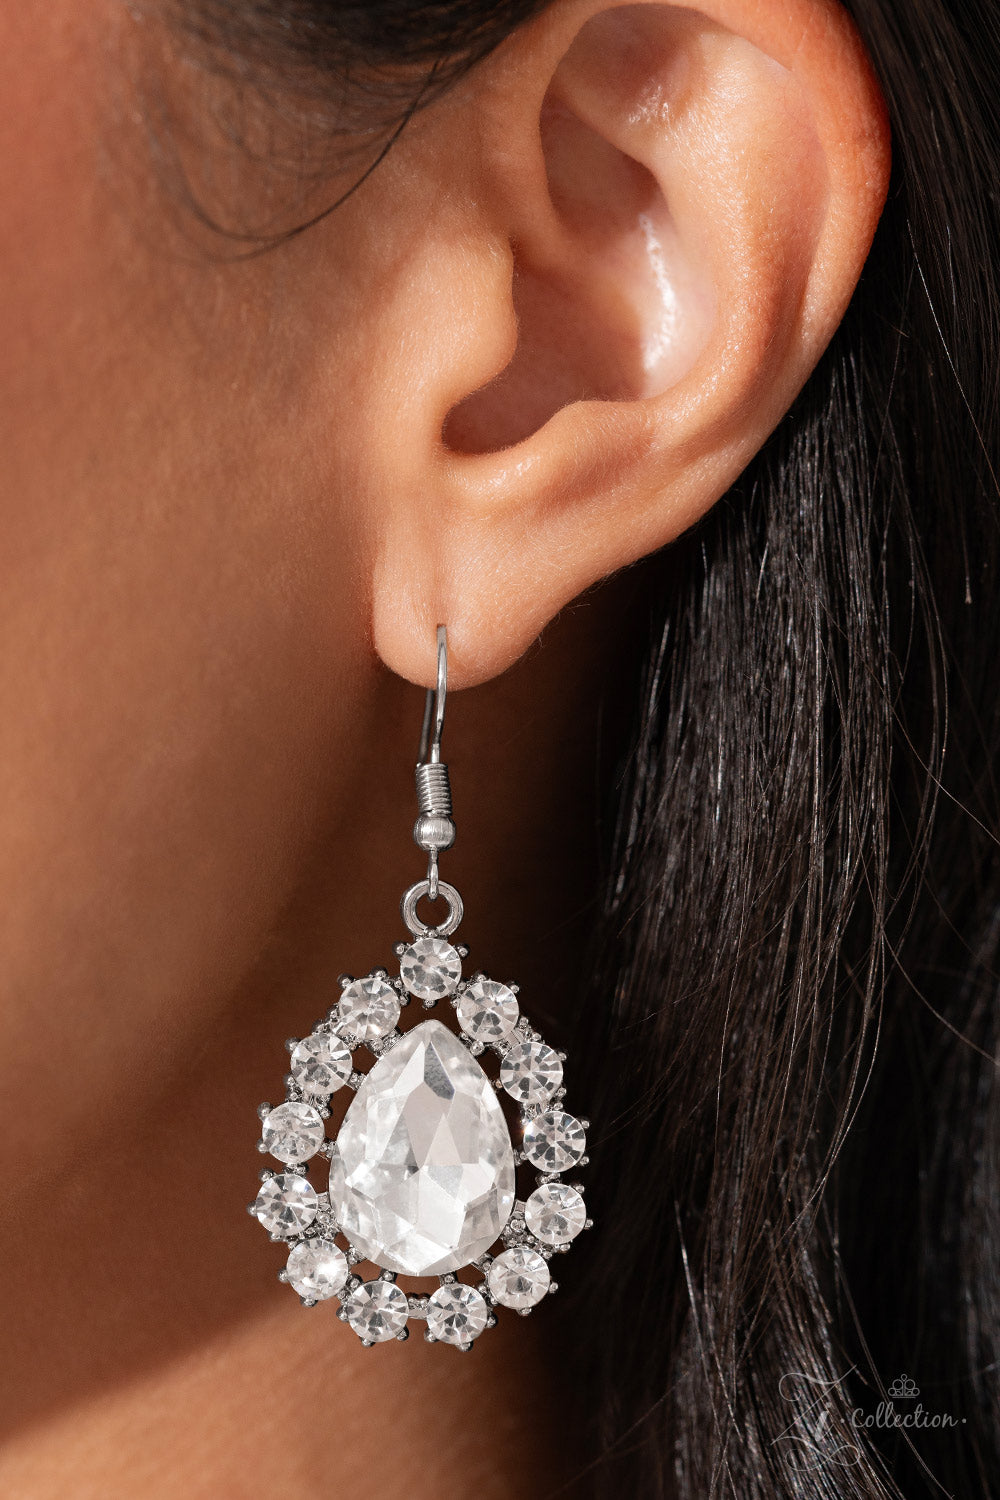 Brilliant white rhinestones, in both round and oval cuts, link around the neck in a stunning display. Each dramatically faceted gem is encircled by tiny white rhinestones set in pronged fittings, bringing a vintage charisma to the design. The floral-inspired frames gradually increase in size as they lead towards the center, where a teardrop-shaped gem drips into the spotlight. Features an adjustable clasp closure.  Sold as one individual necklace. Includes one pair of matching earrings.